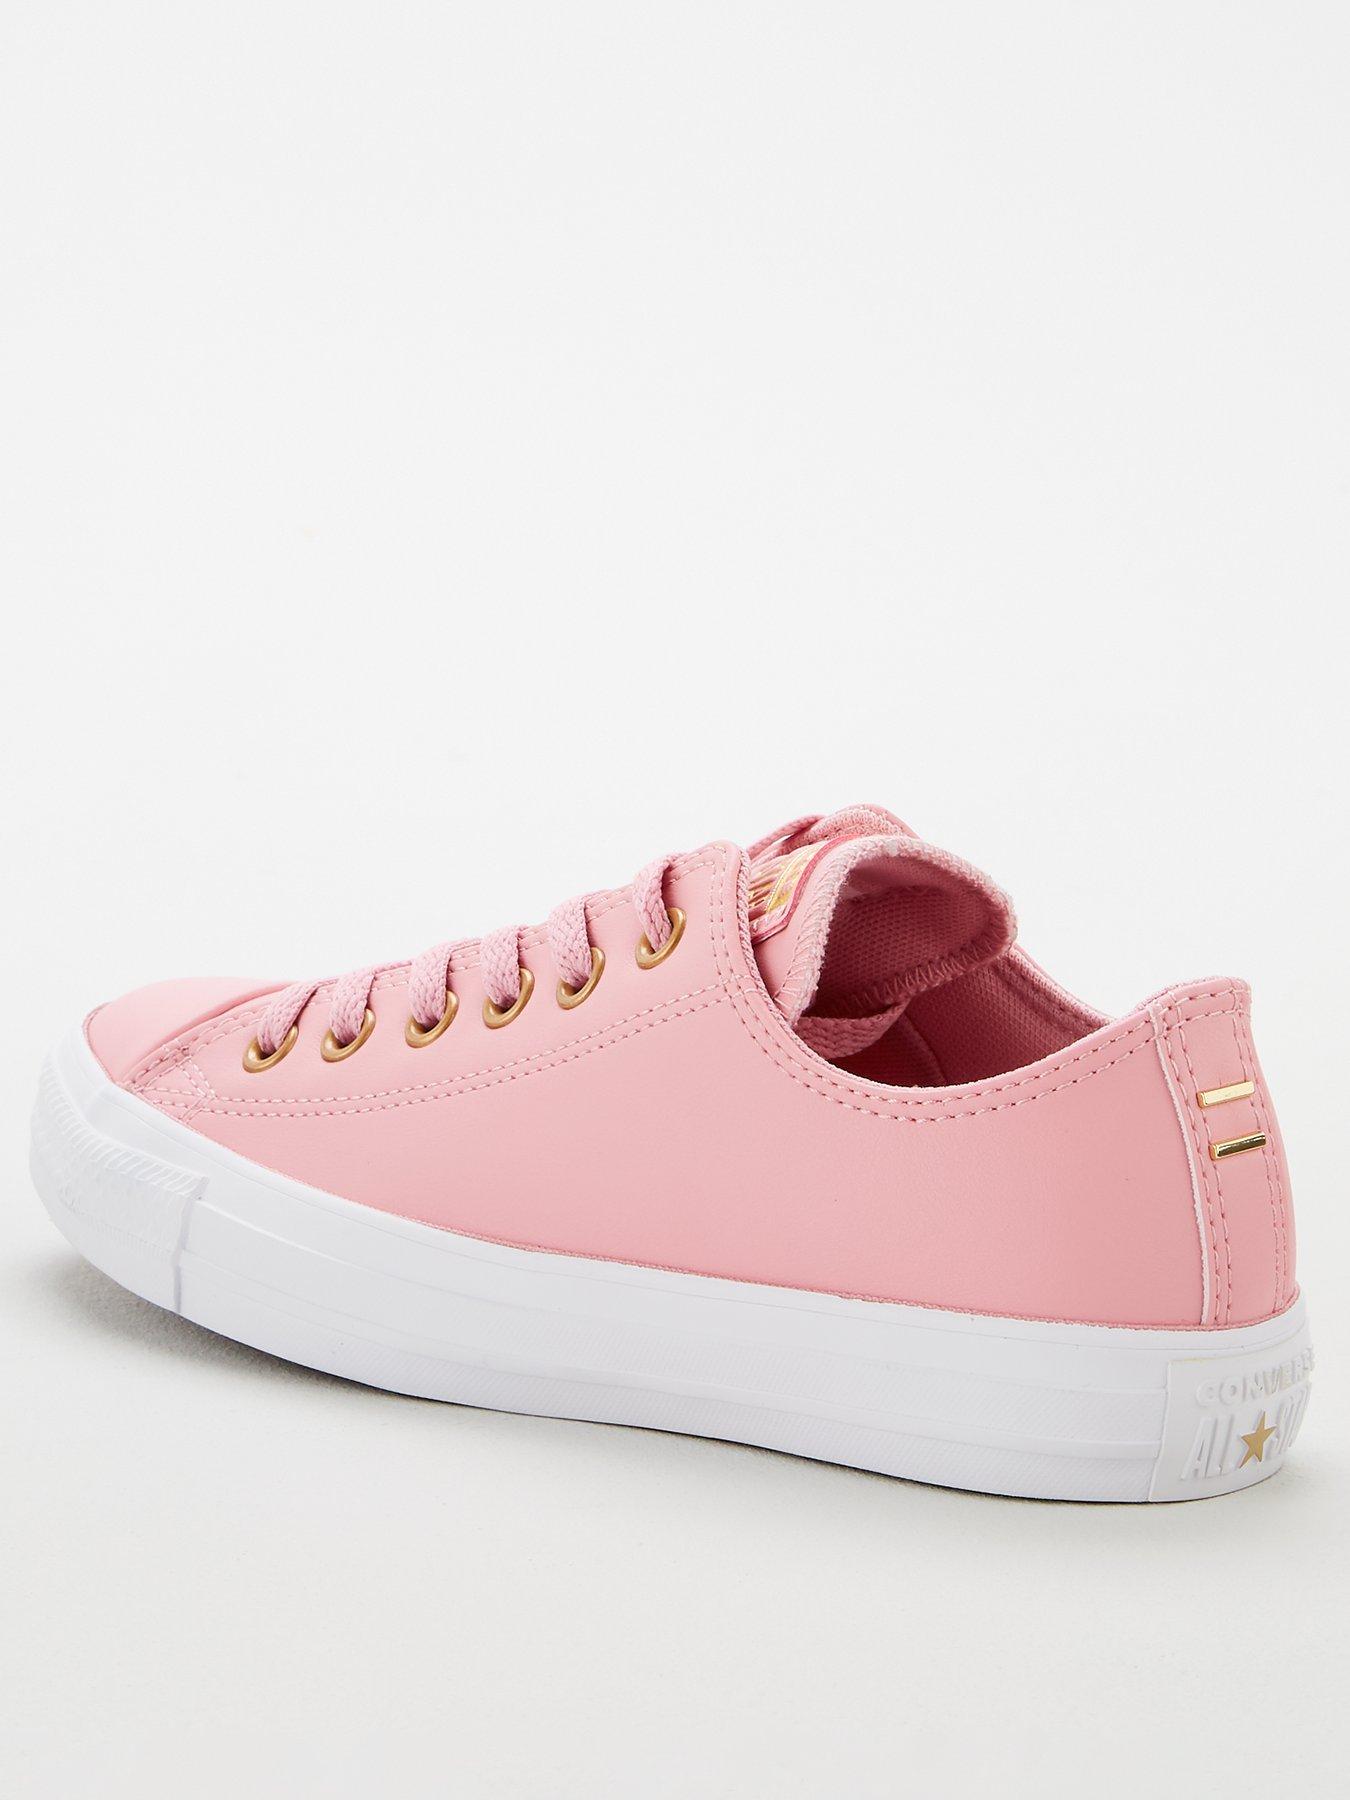 pink leather converse uk